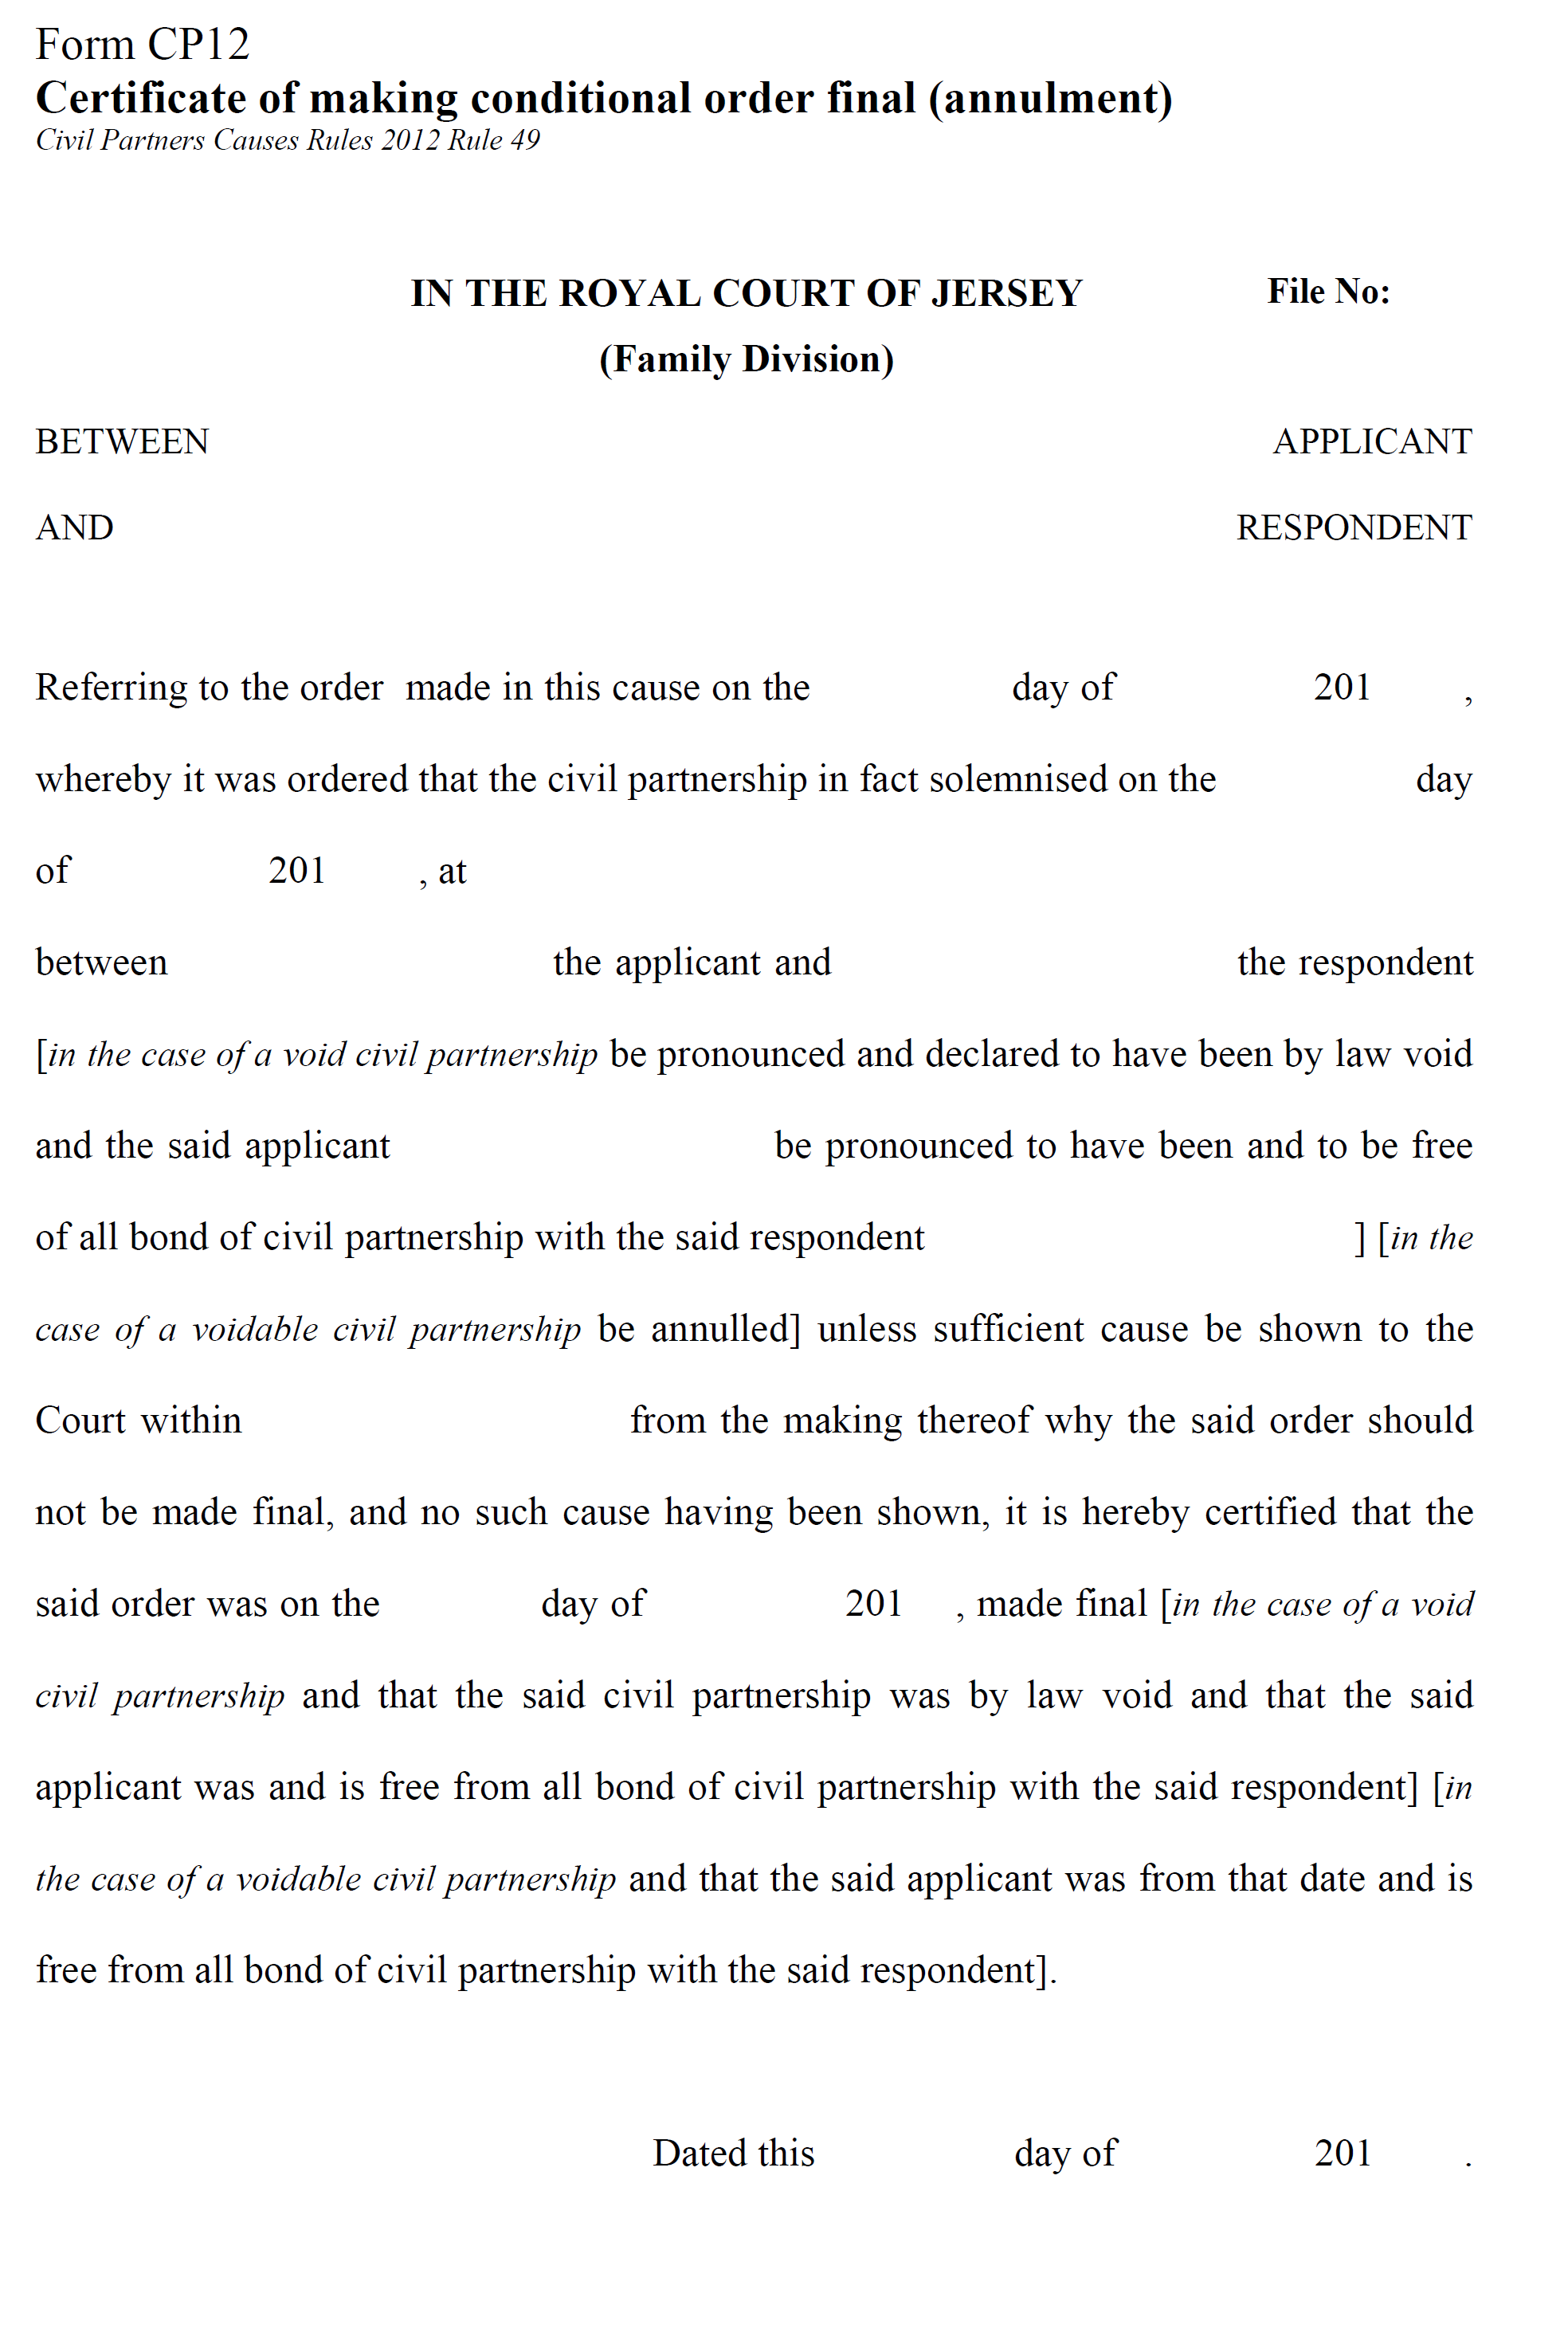 Form CP12 - Certificate of making conditional order final (annulment)